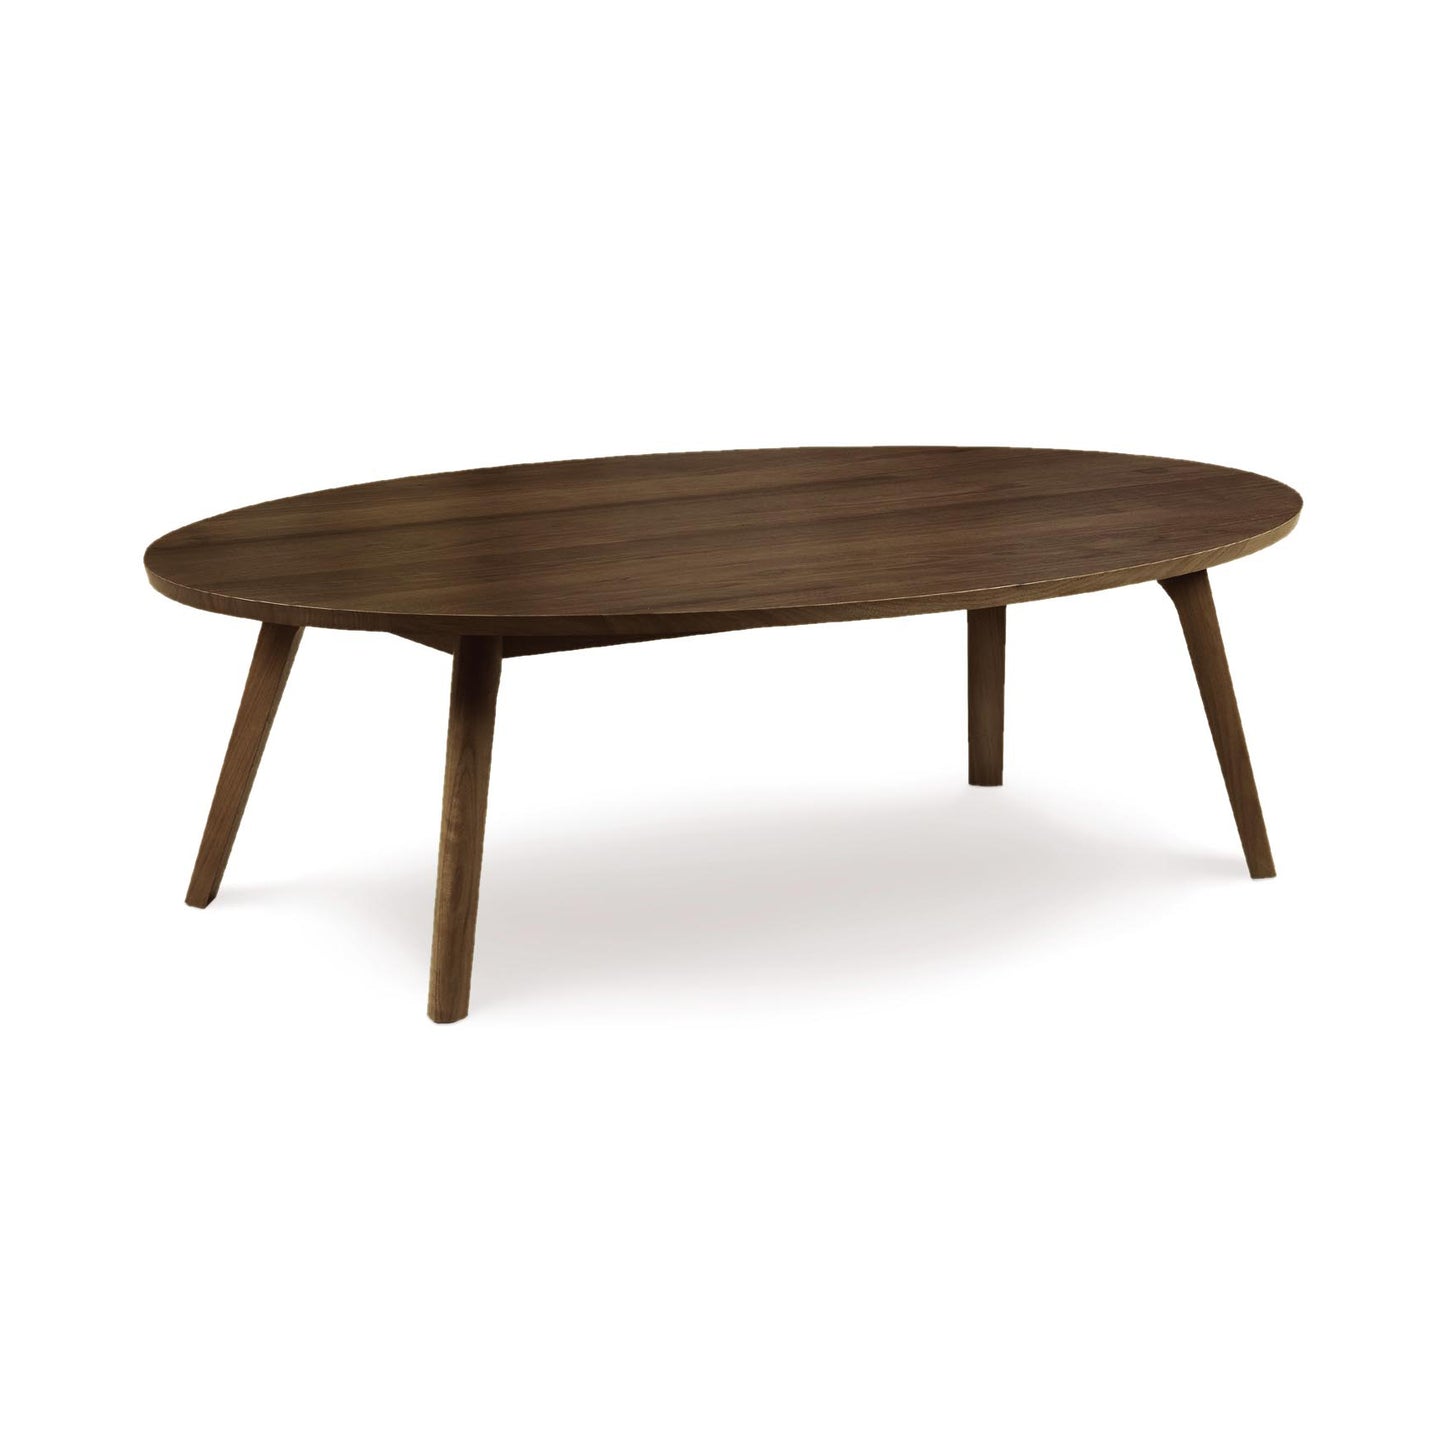 A Copeland Furniture Catalina Oval Coffee Table, designed in mid-century American style, is made from sustainably harvested hardwood and showcased on a white background.